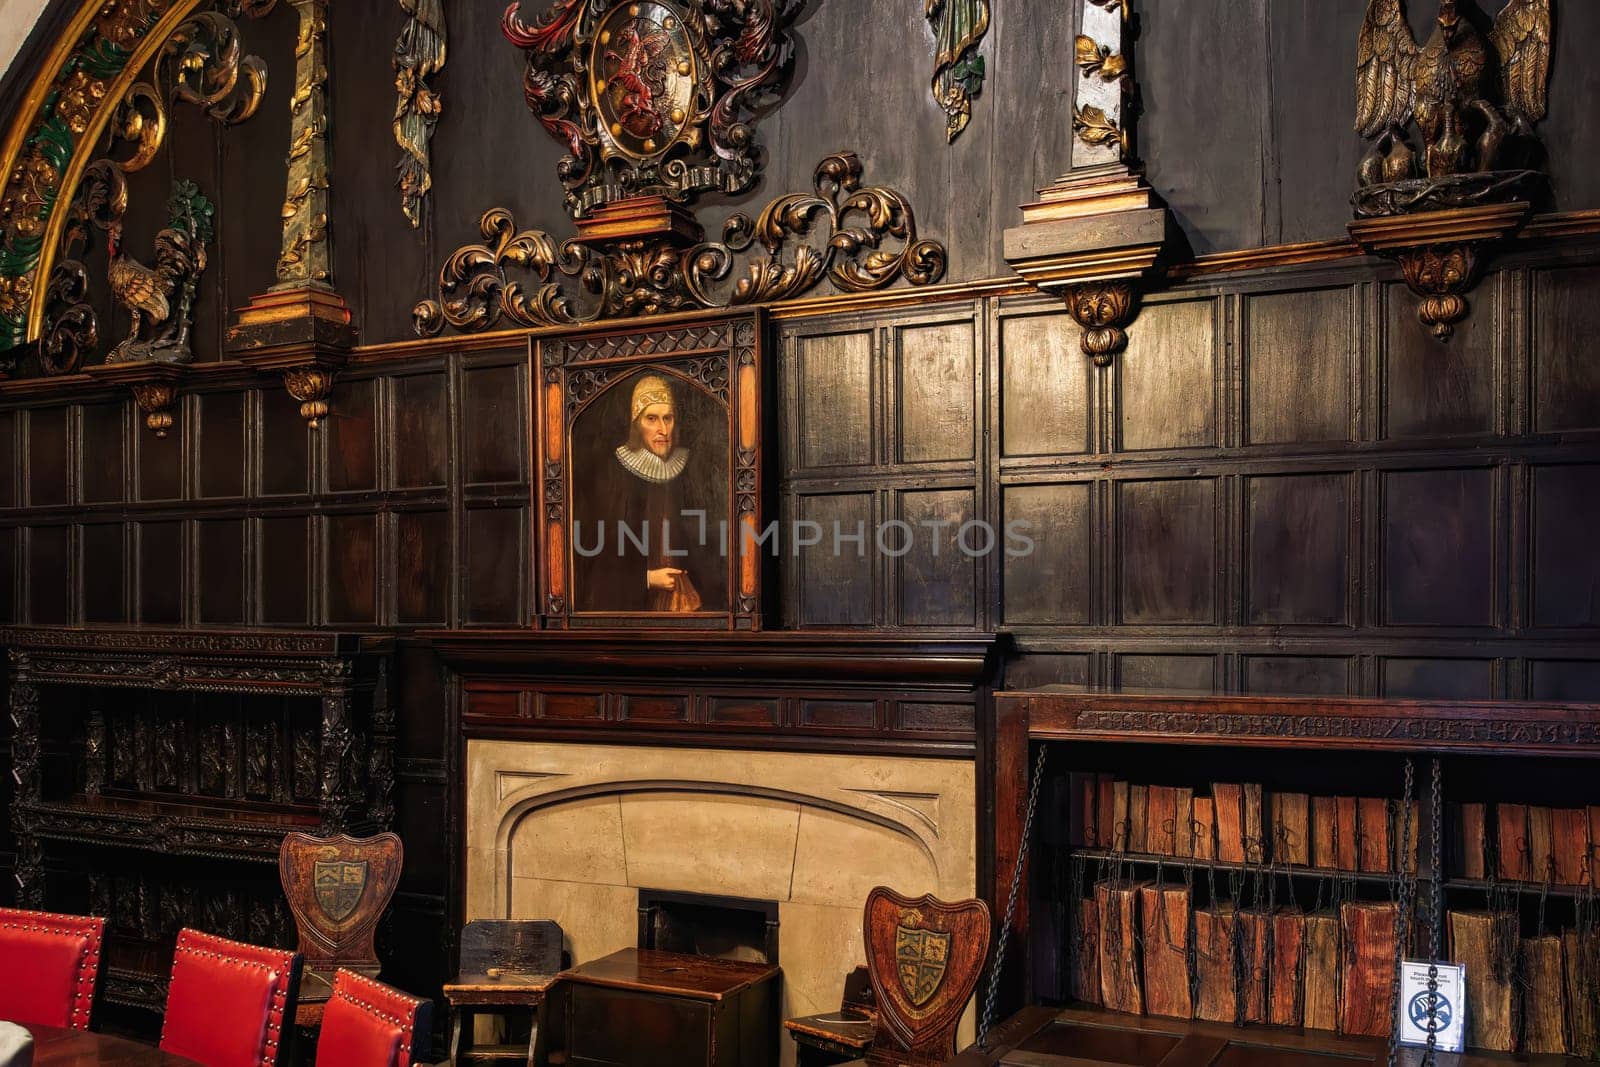 Chetham 1653 medieval public library interior in Manchester, UK. by bestravelvideo